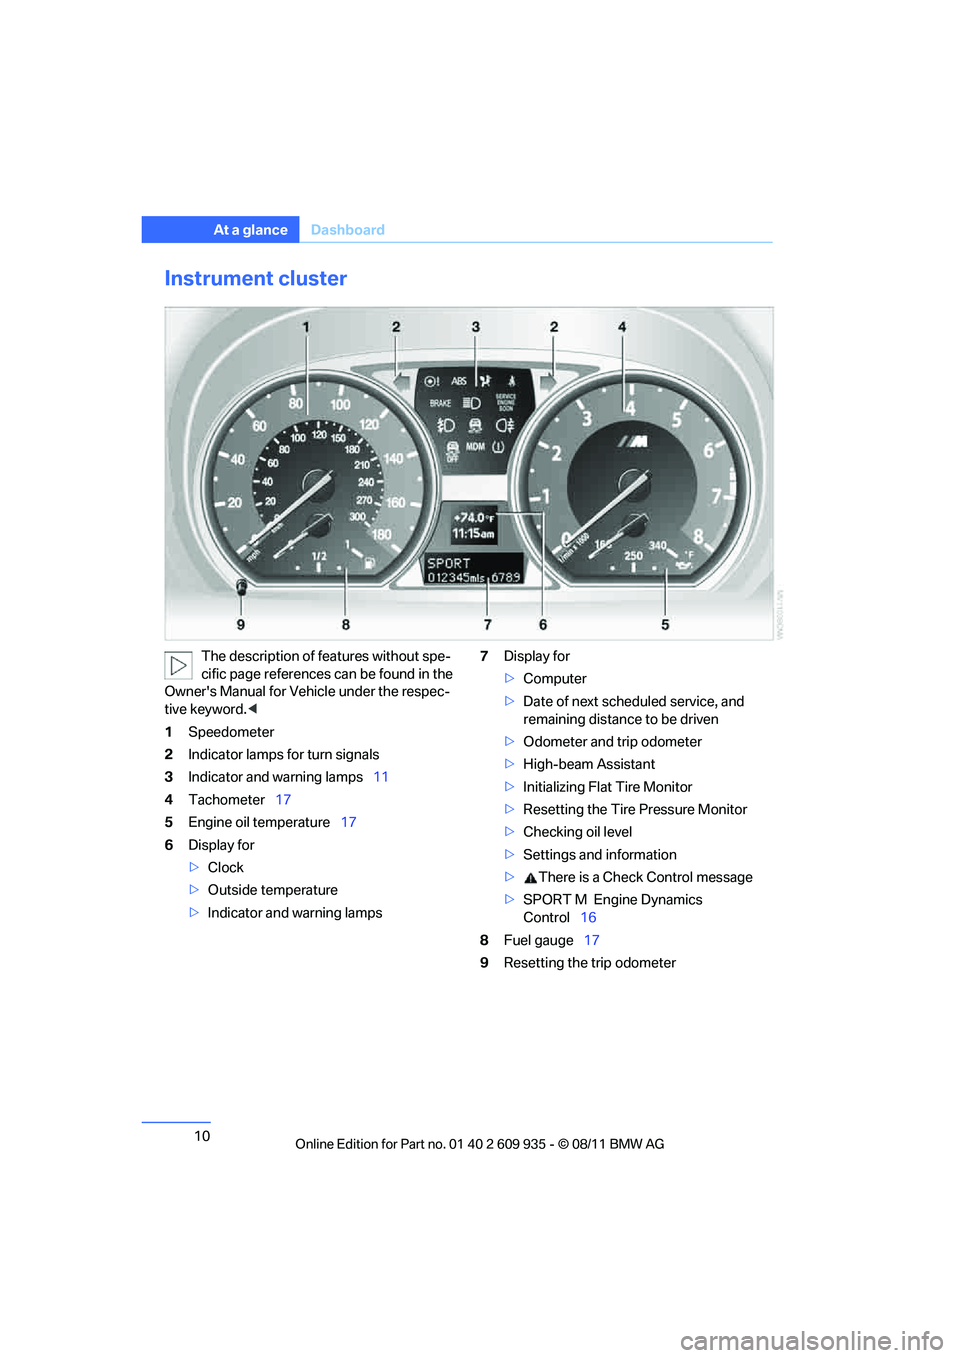 BMW M COUPE 2011  Owners Manual 10
At a glanceDashboard
Instrument cluster
The description of features without spe-
cific page references can be found in the 
Owners Manual for Vehicle under the respec-
tive keyword. <
1 Speedomete